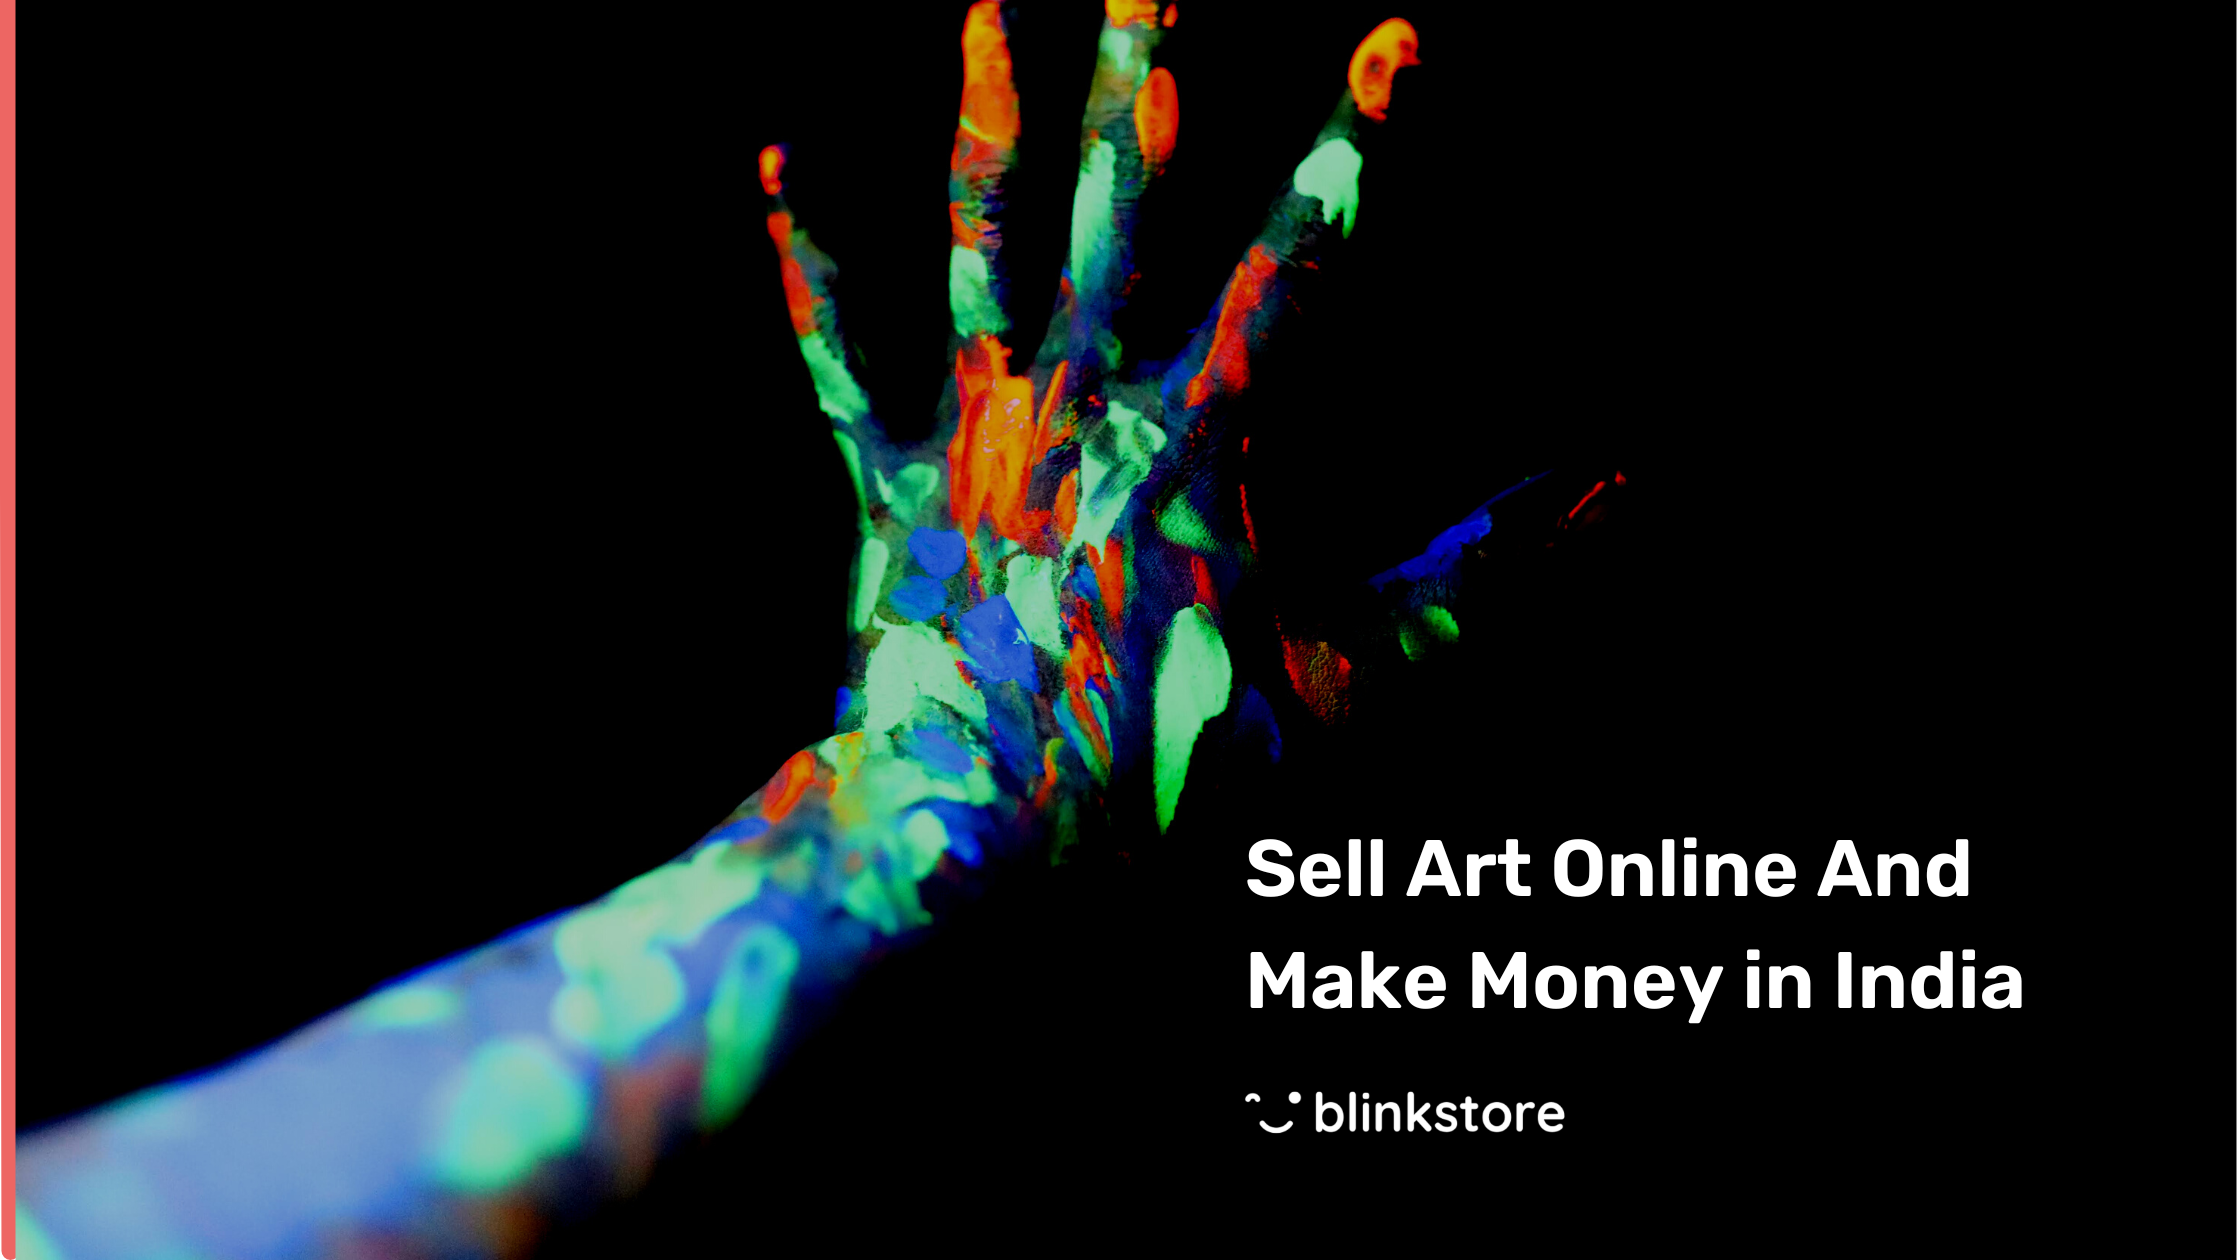 Ultimate Guide On How To Sell Art Online And Make Money in India